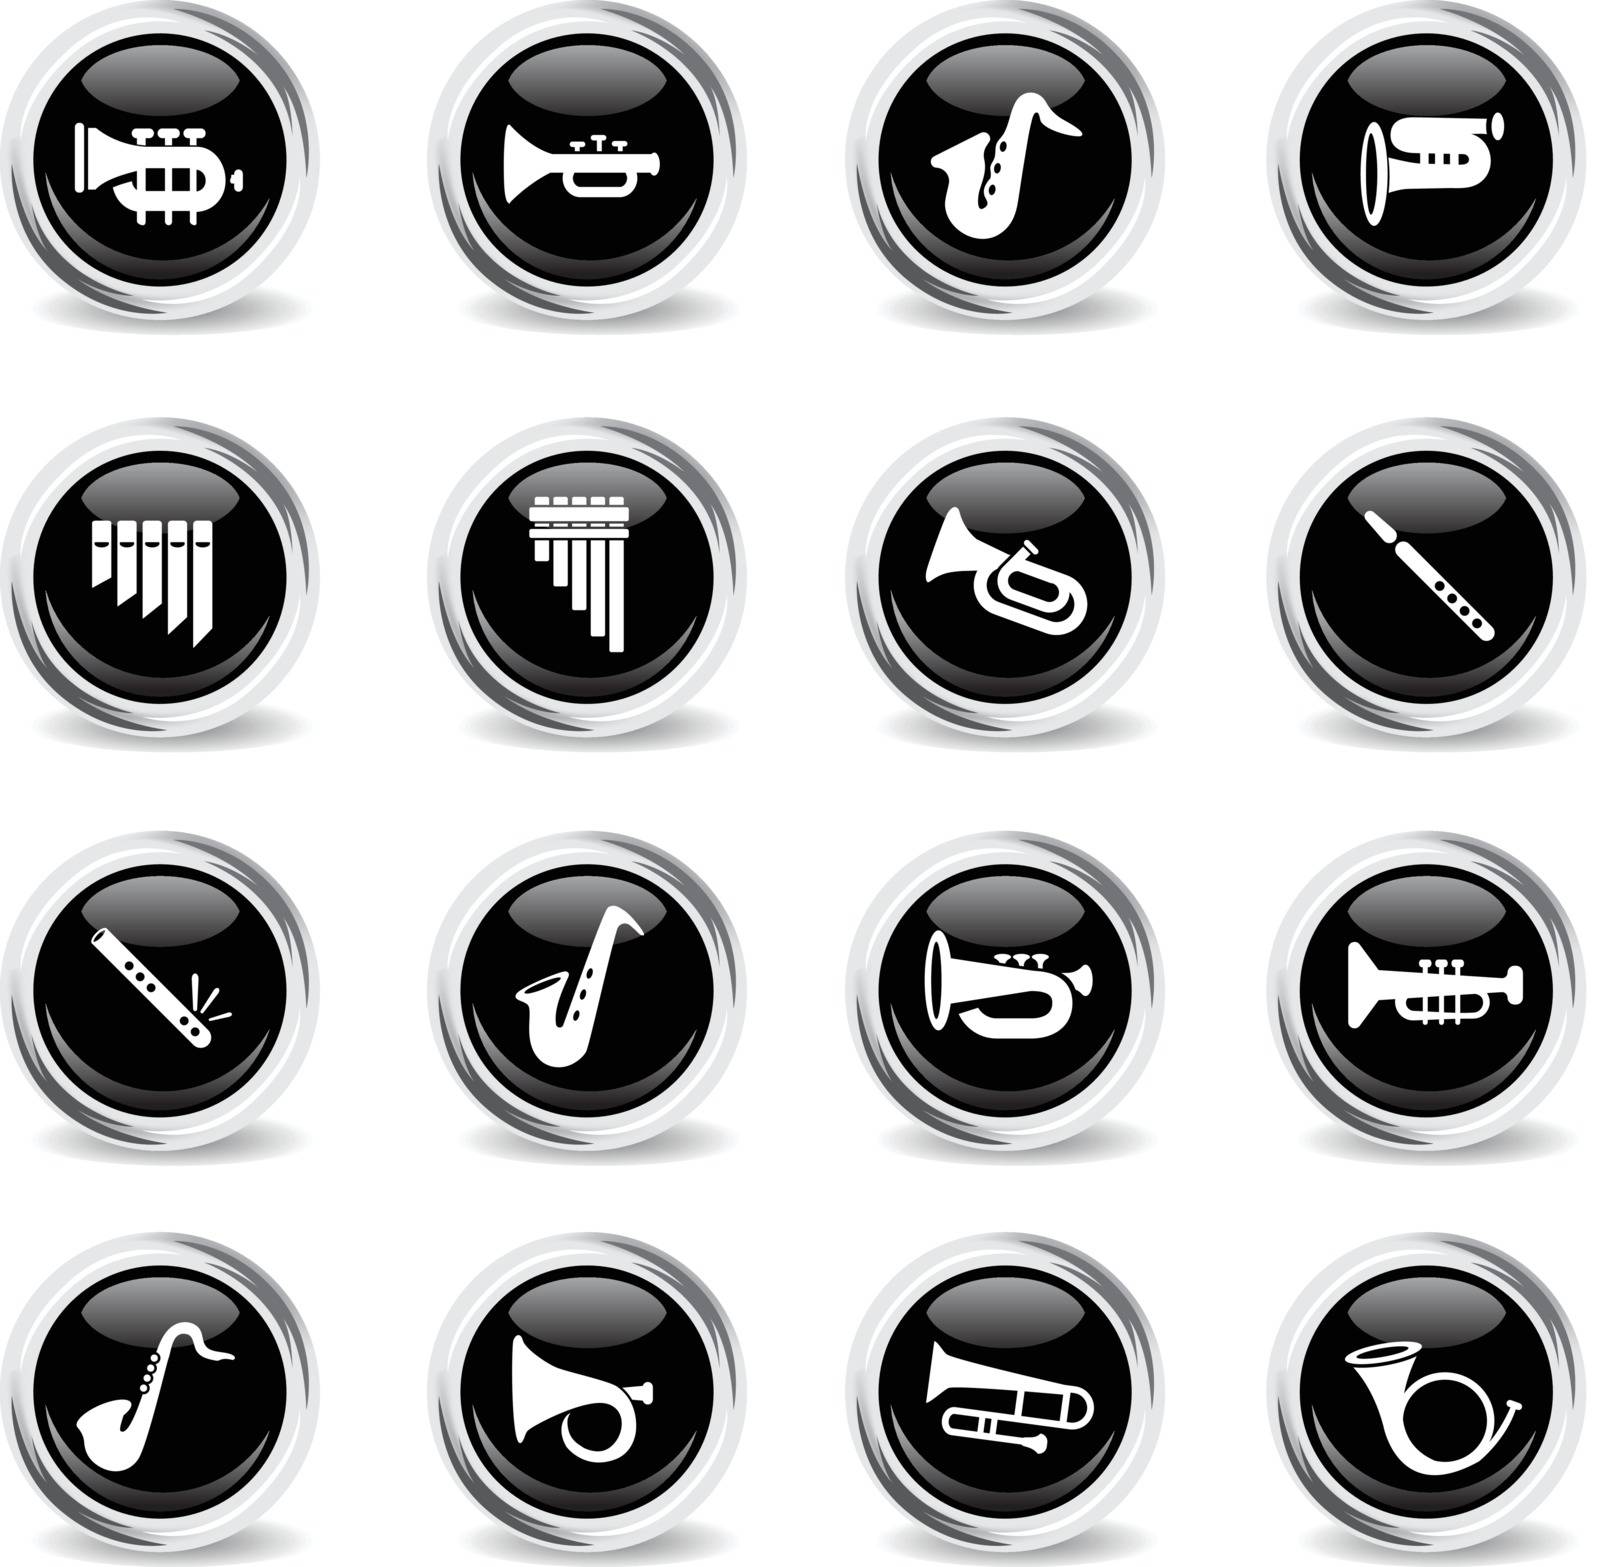 wind instruments web icons - black round chrome buttons